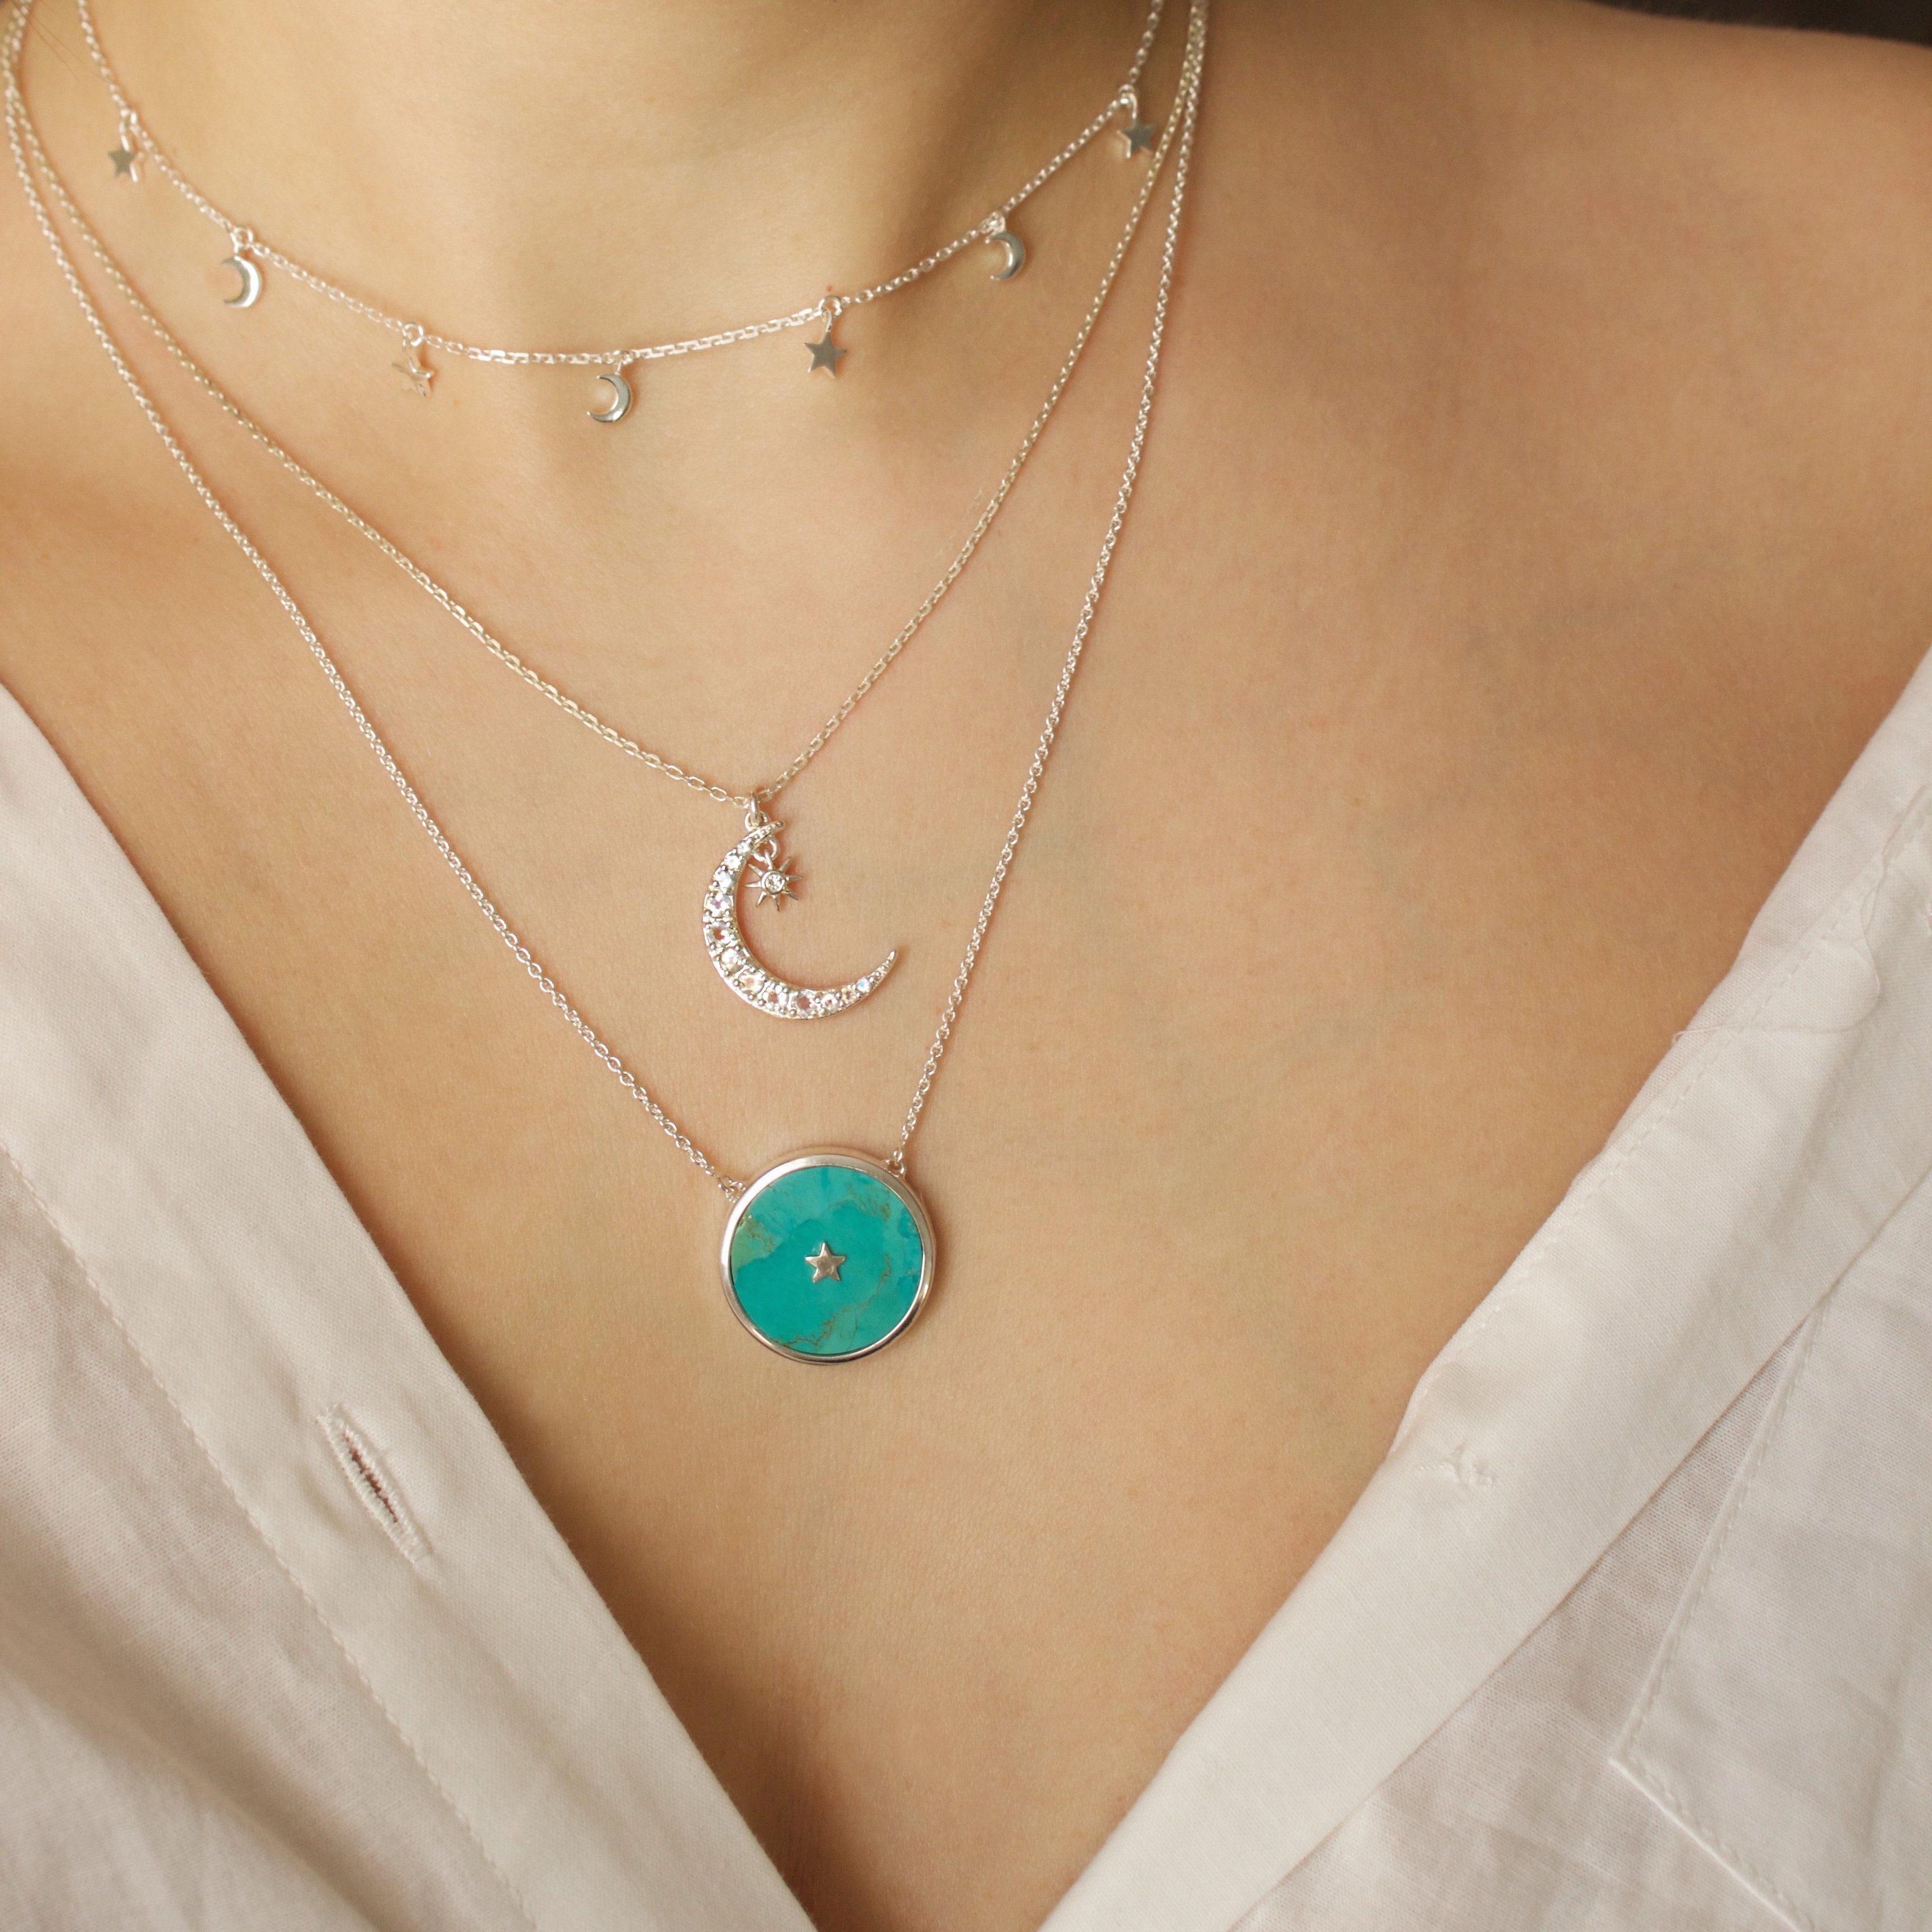 Sterling Silver Night Sky Pendant in Turquoise Necklace VJI 